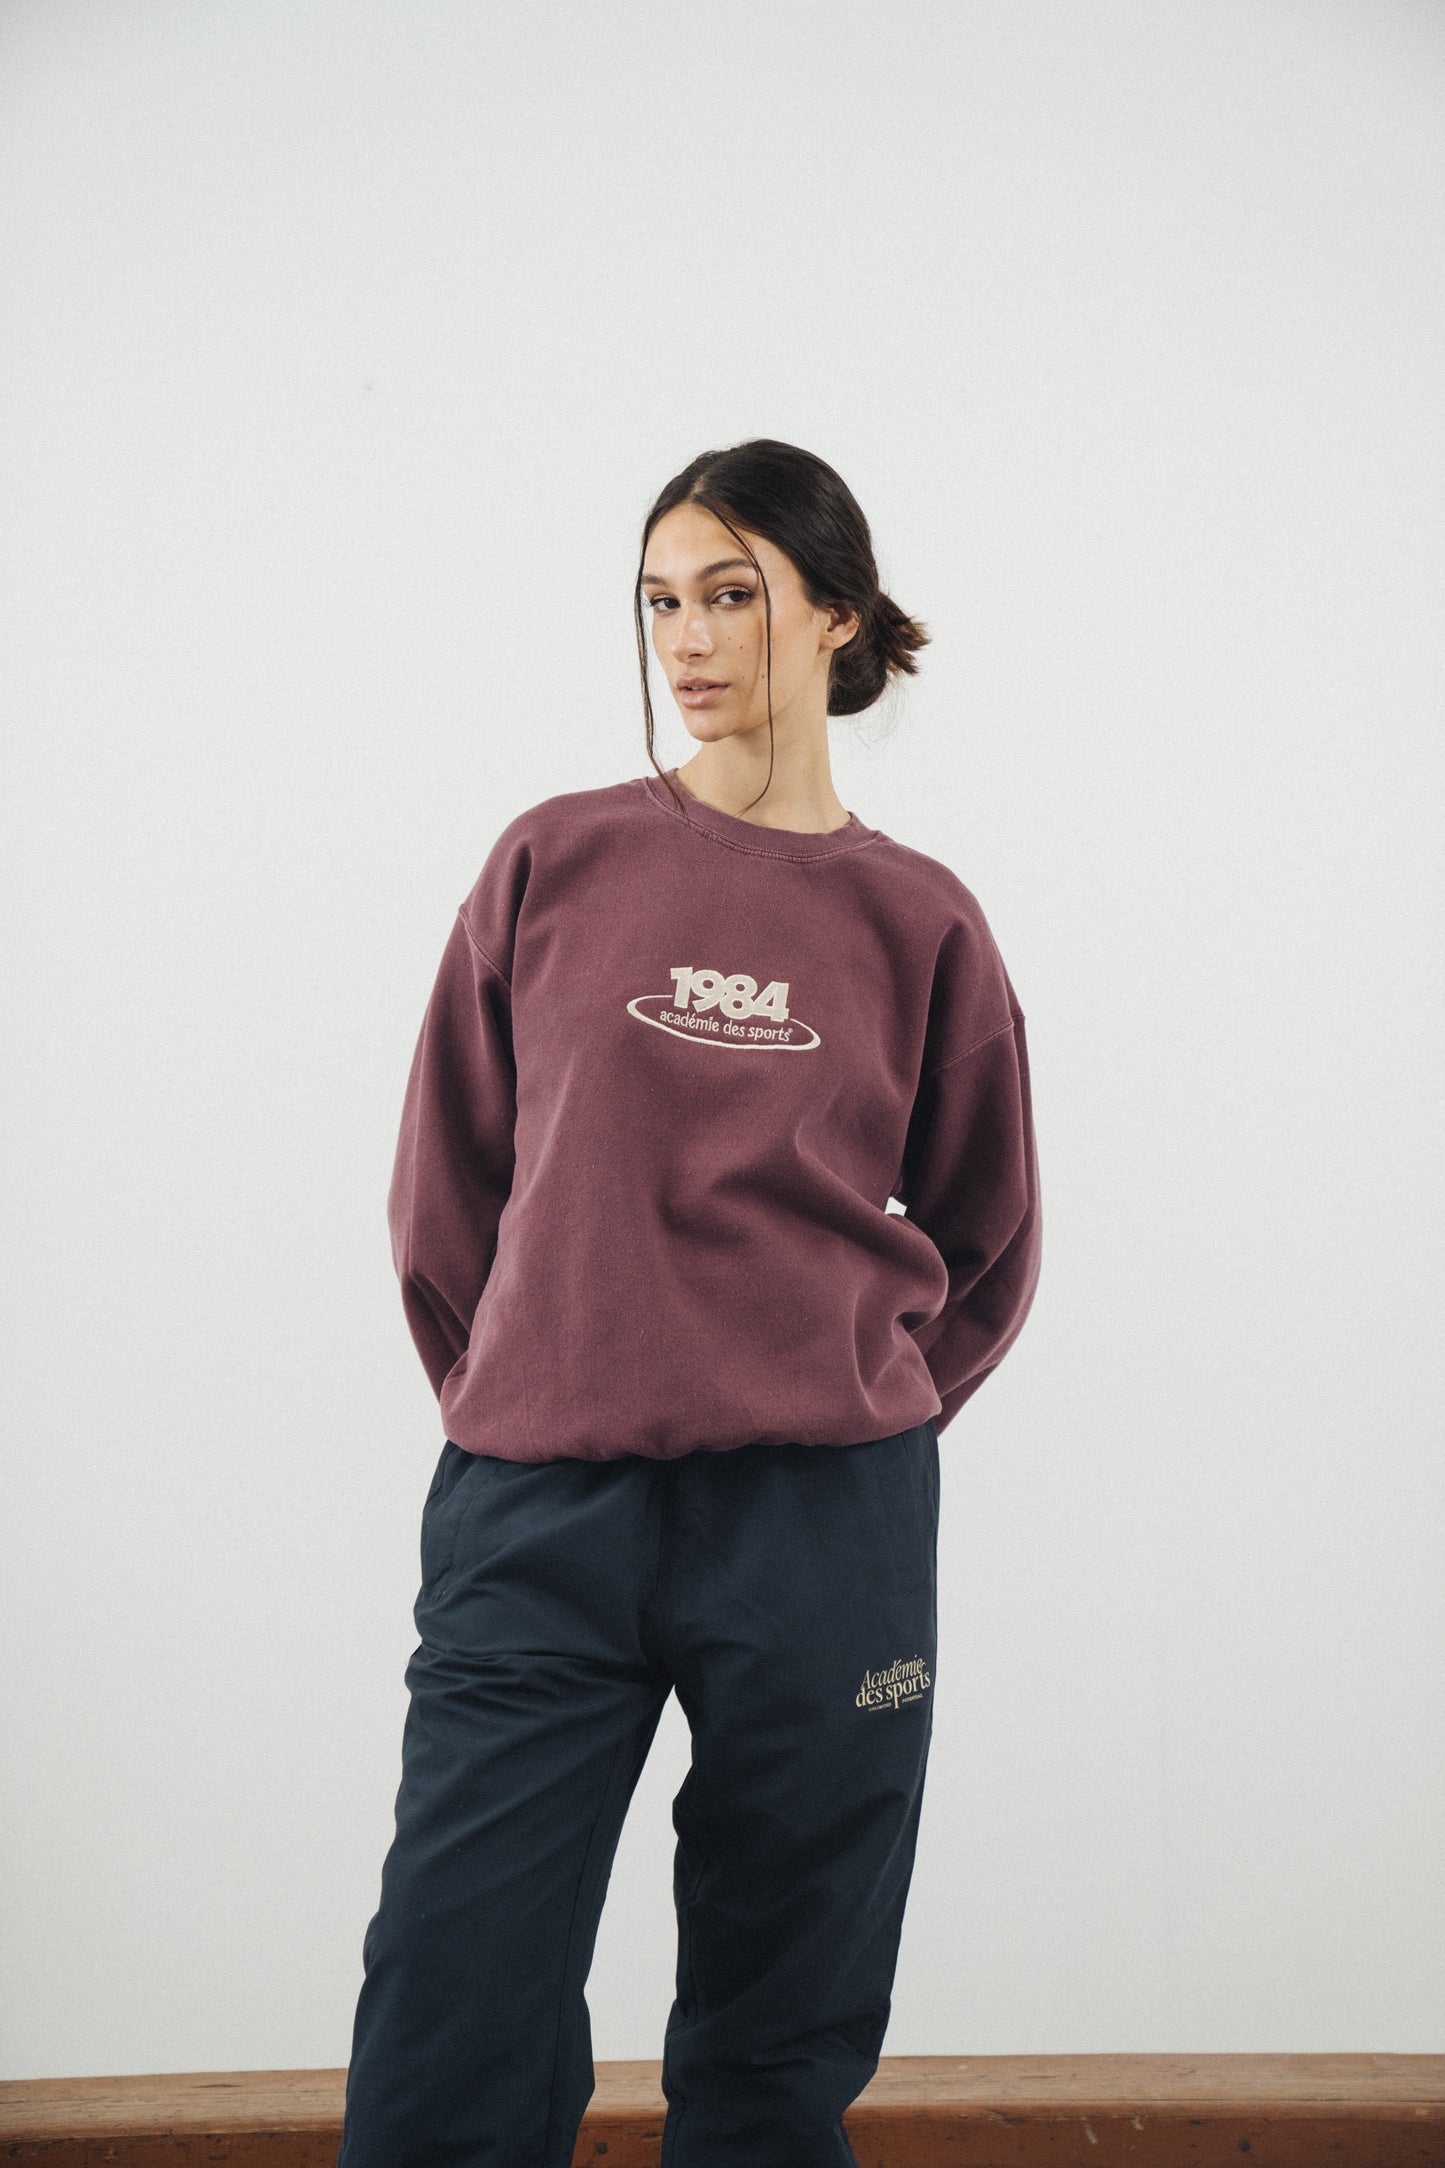 Vice 84 '1984 Disc' Embroidered Sweater - Vintage Washed Maroon